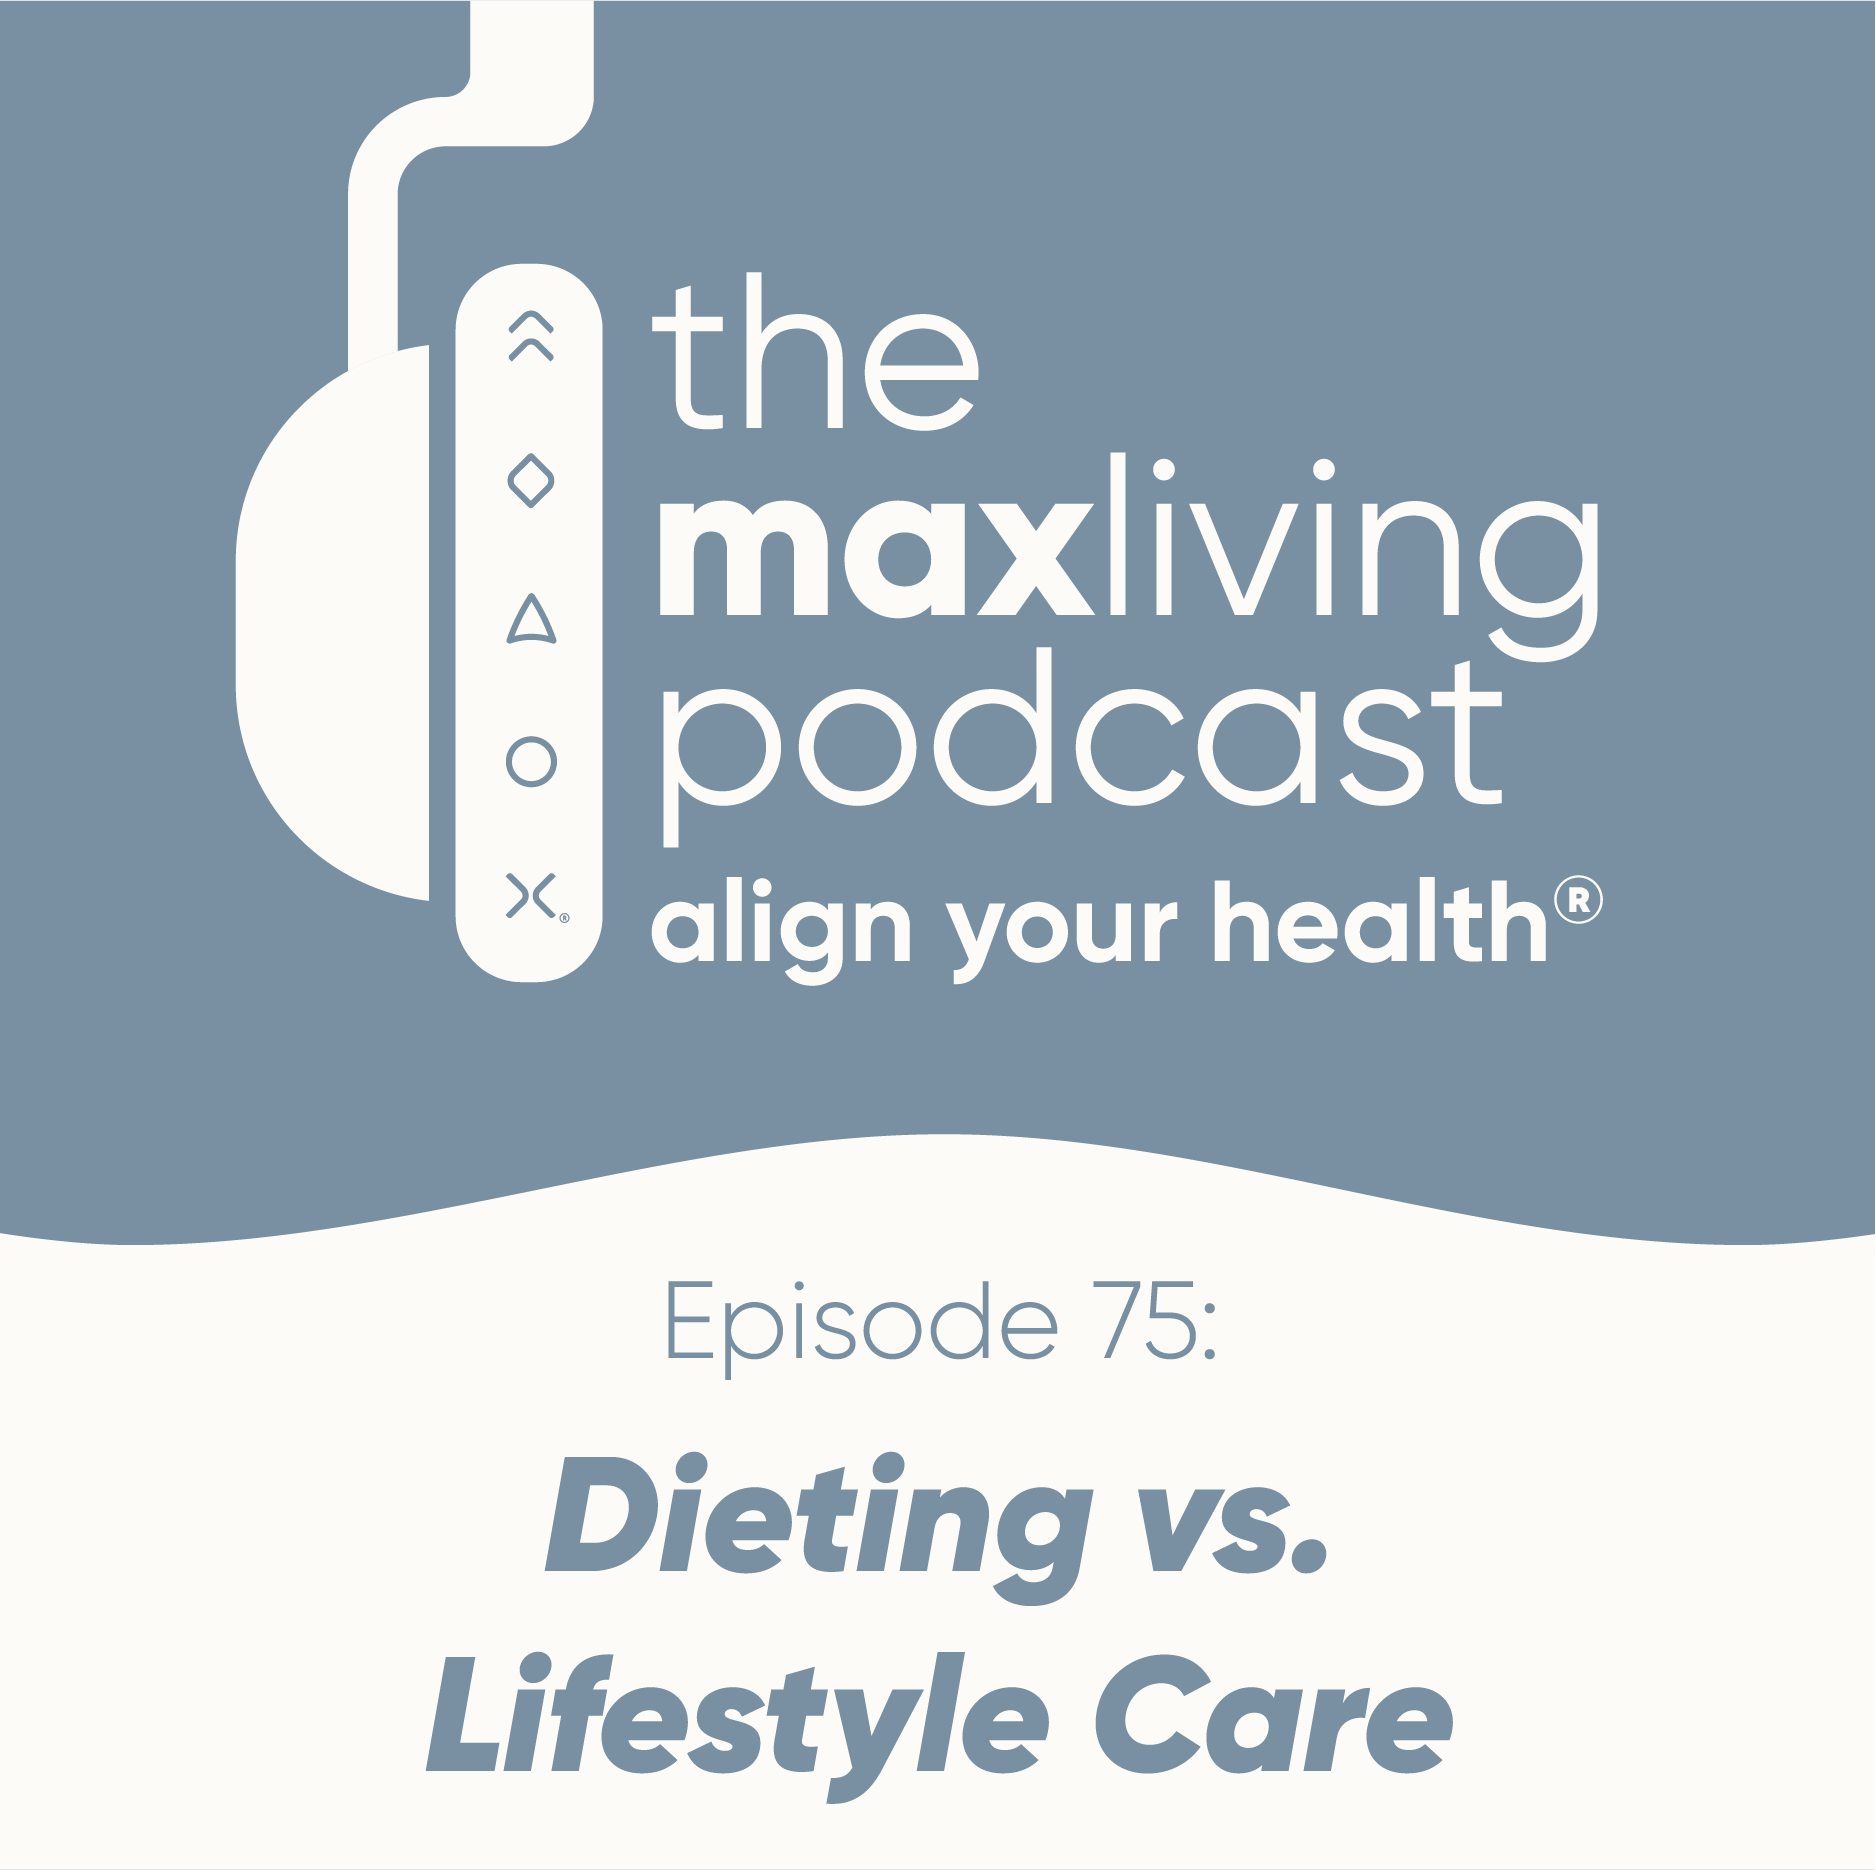 Dieting vs. Lifestyle Care